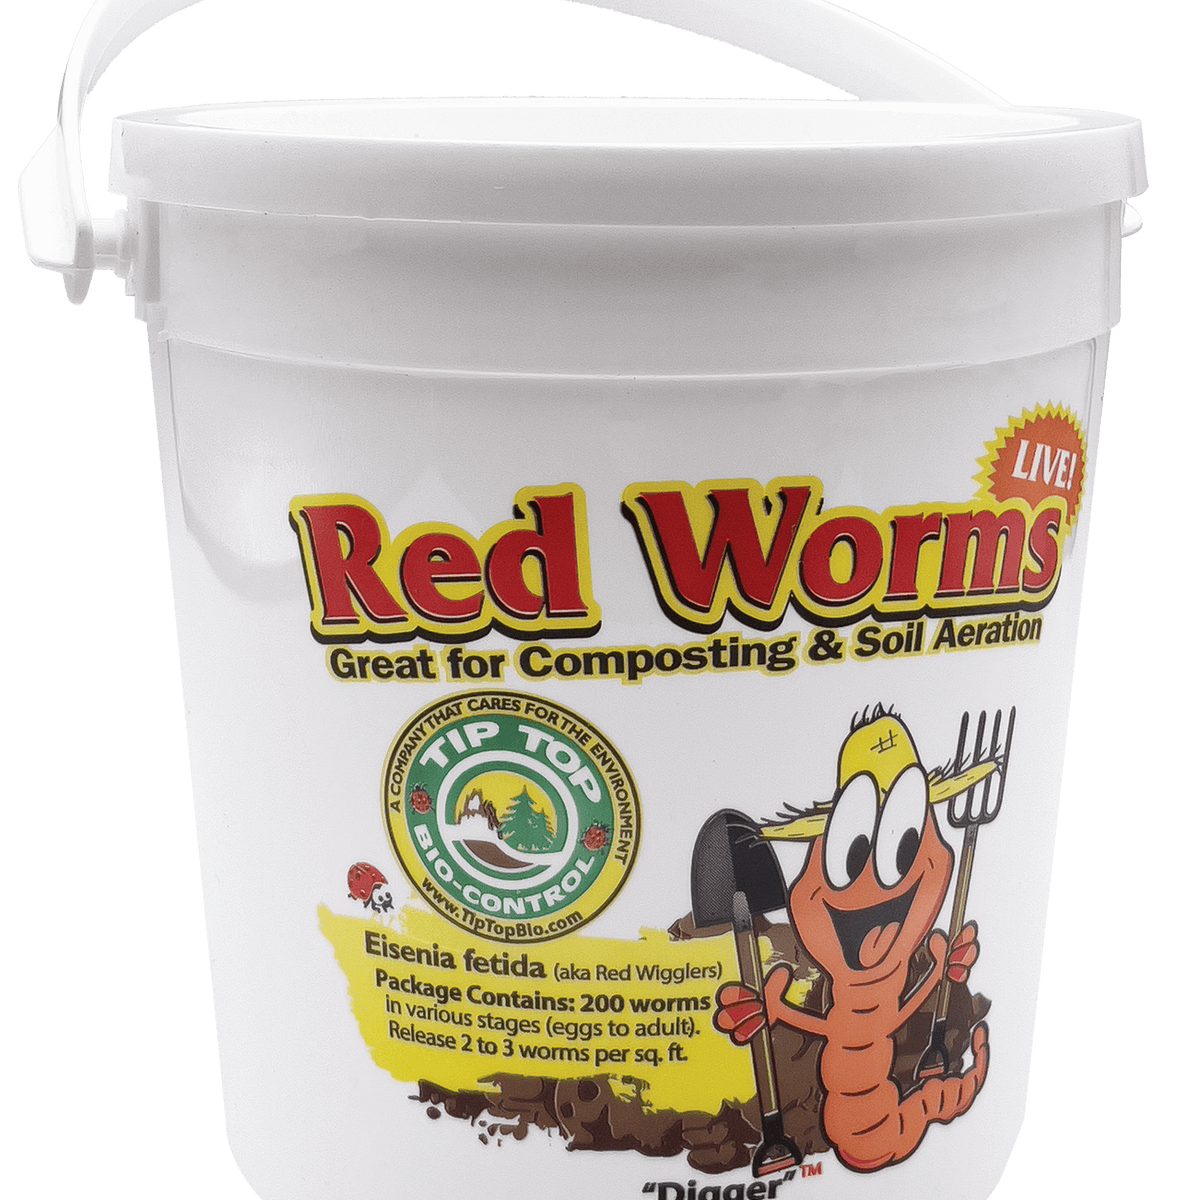 Composting Red Wiggler Worms – Tip Top Bio-Control